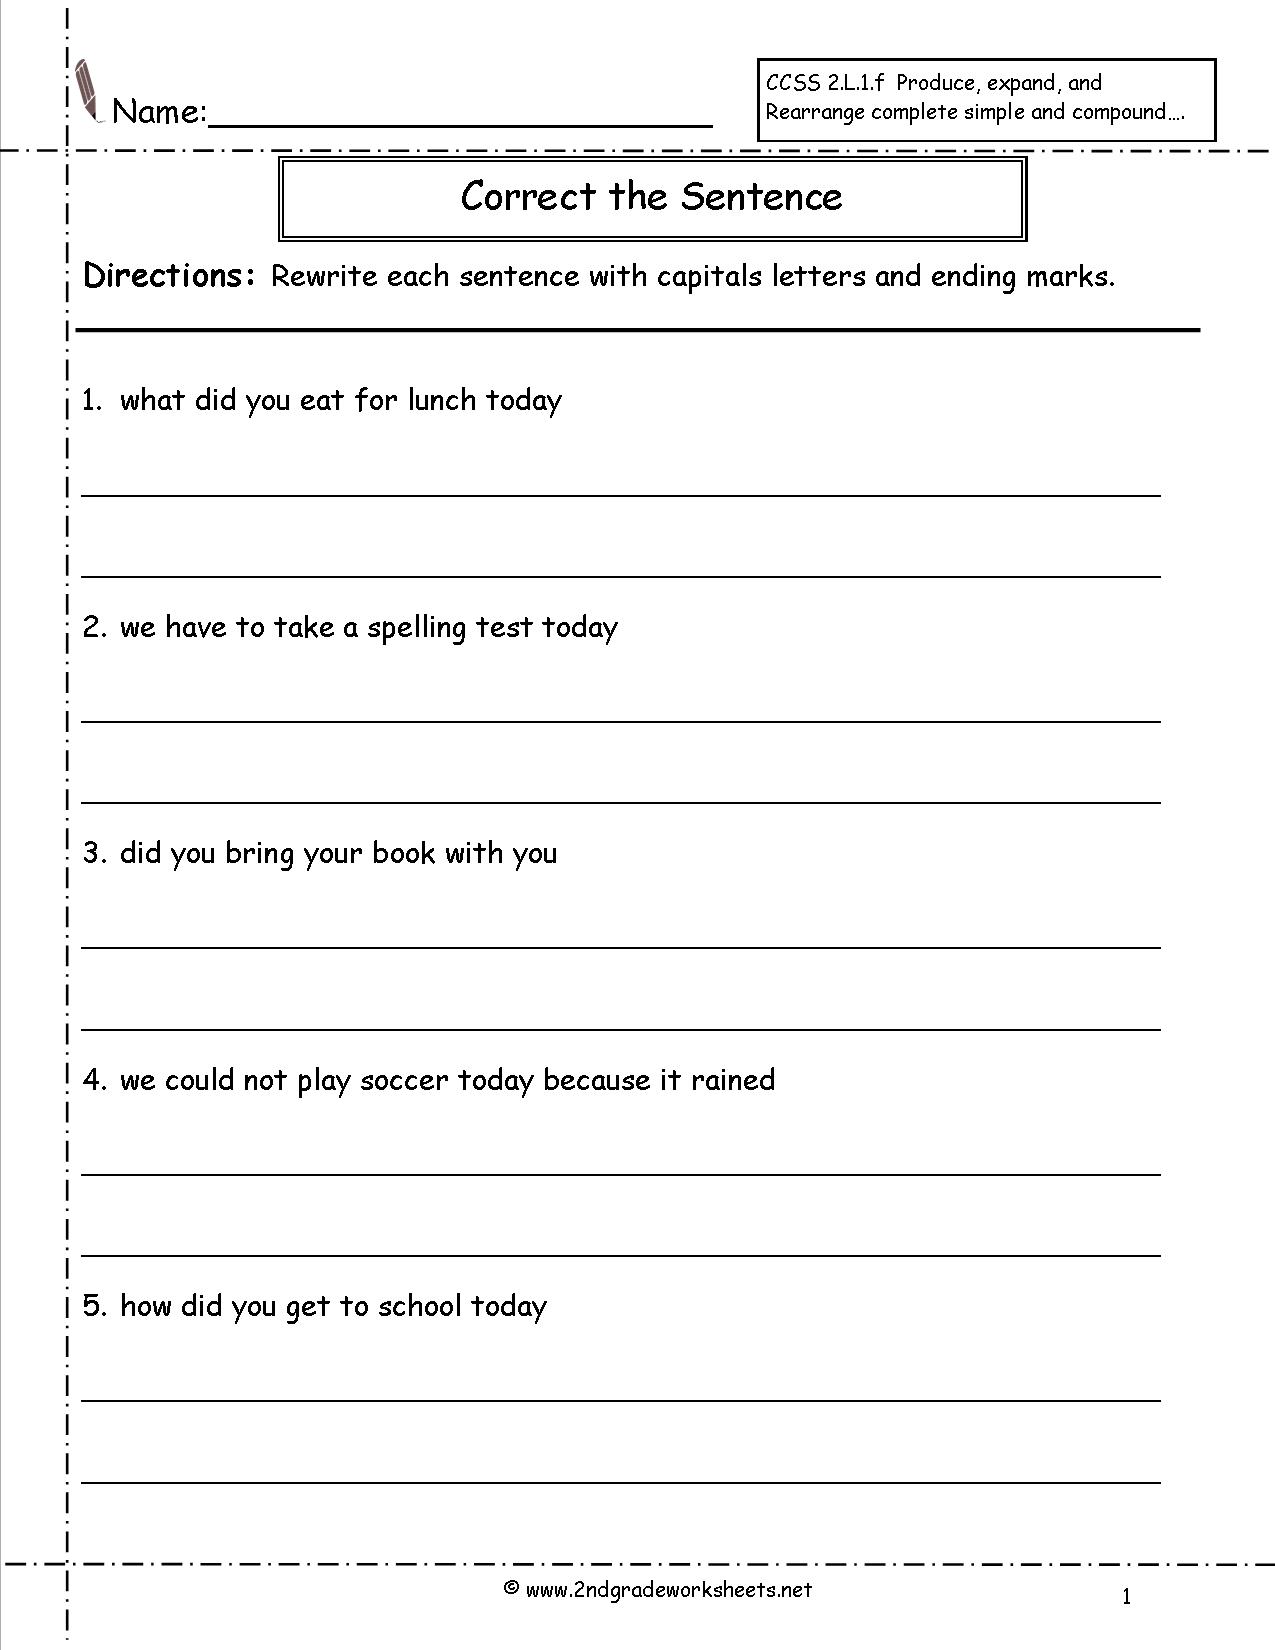 click-to-close-or-click-and-drag-to-move-worksheets-for-class-1-english-worksheets-for-kids